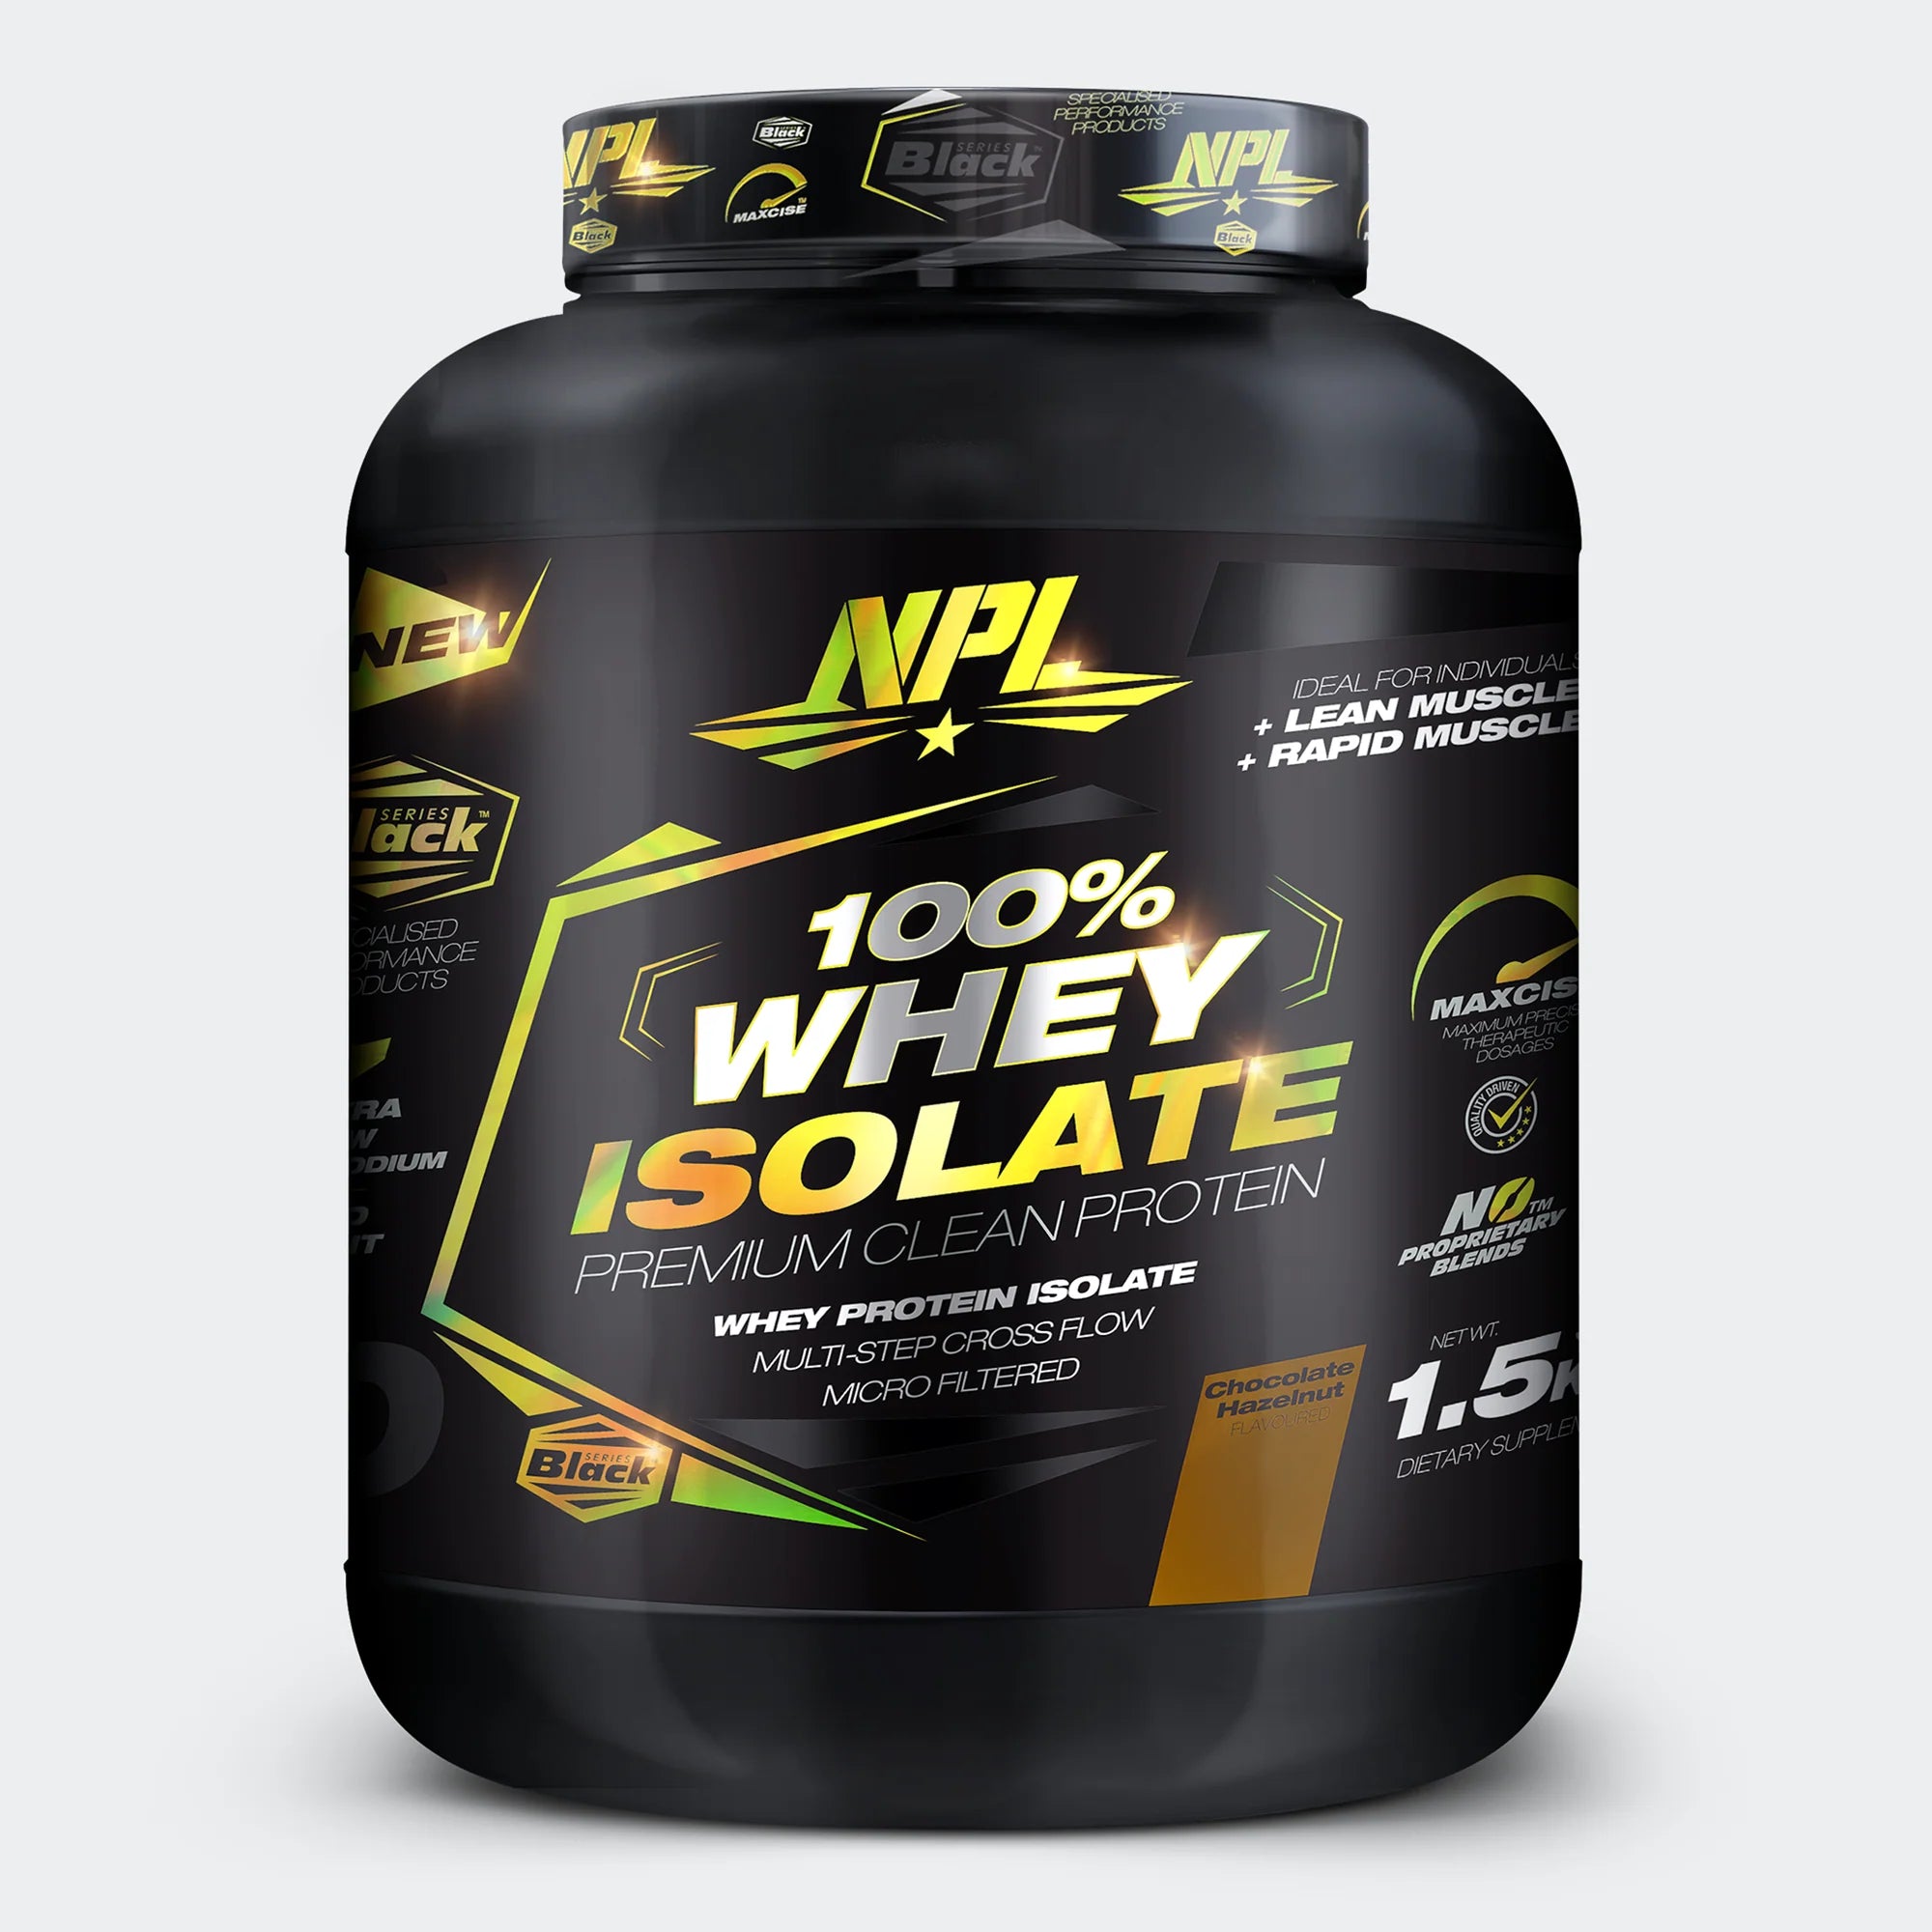 PURE WHEY PROTEIN ISOLATE